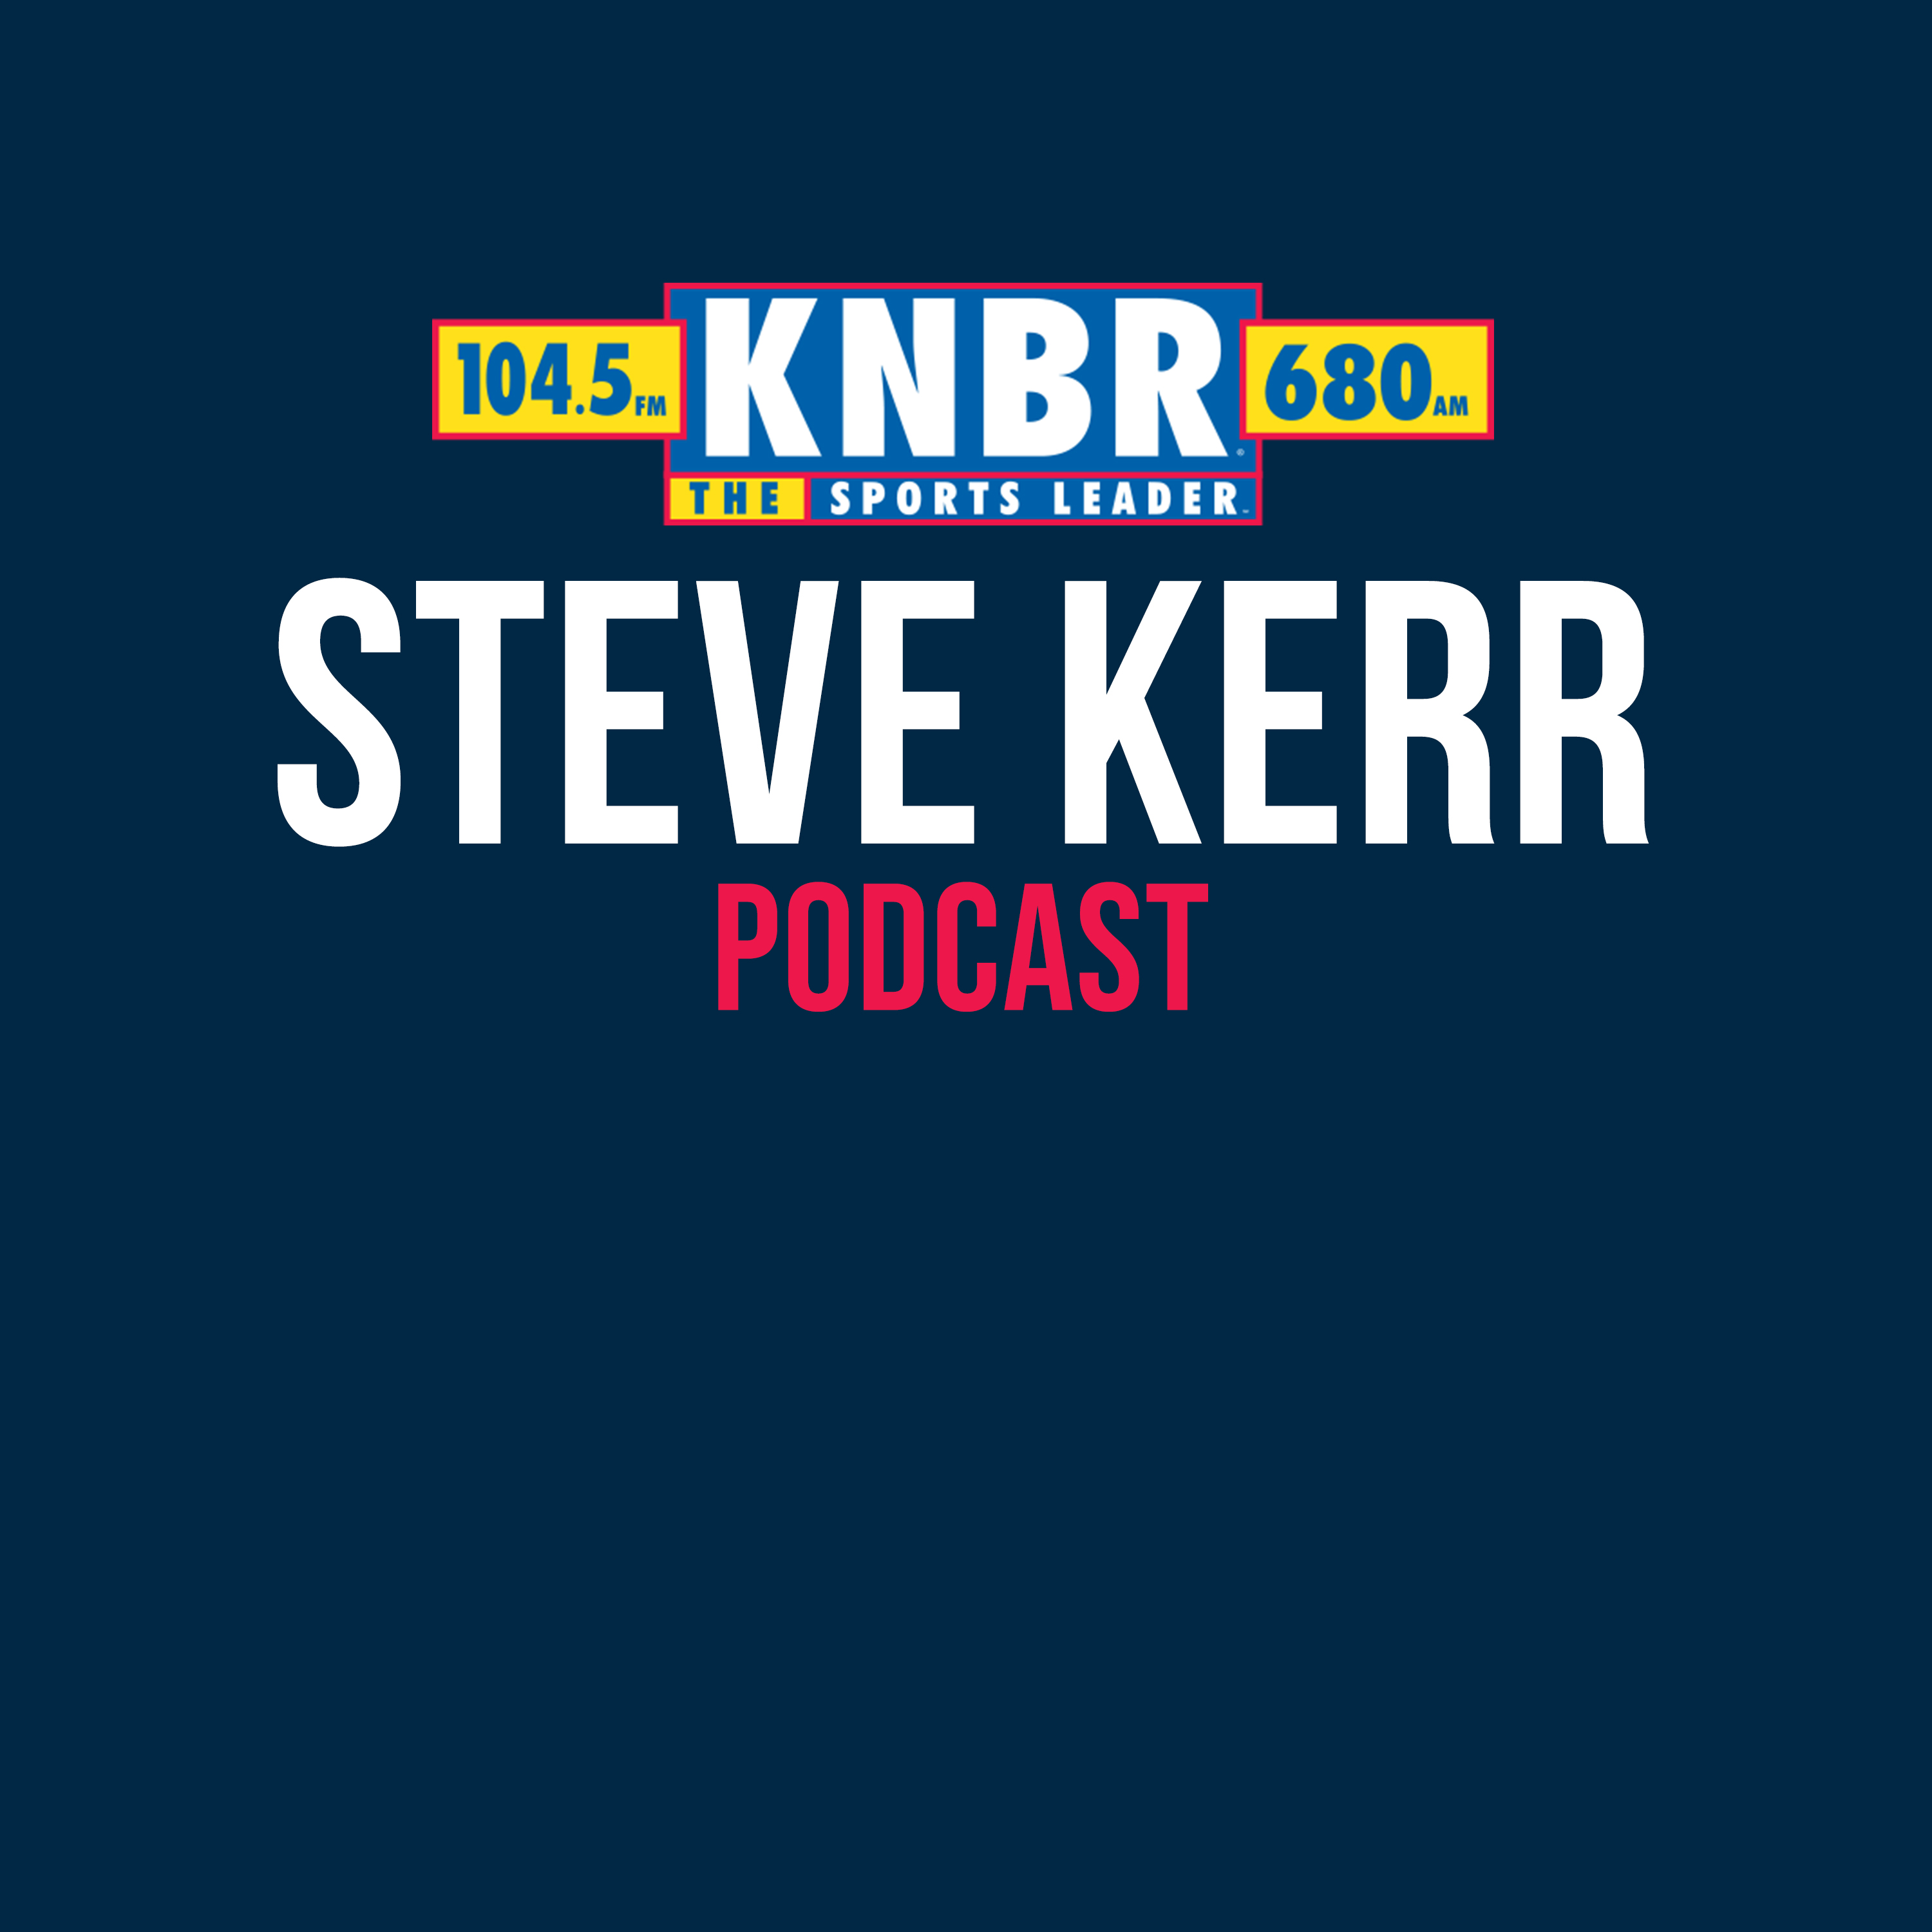 1-31 Steve Kerr joins Tolbert & Copes to discuss the Warriors win over the 76ers